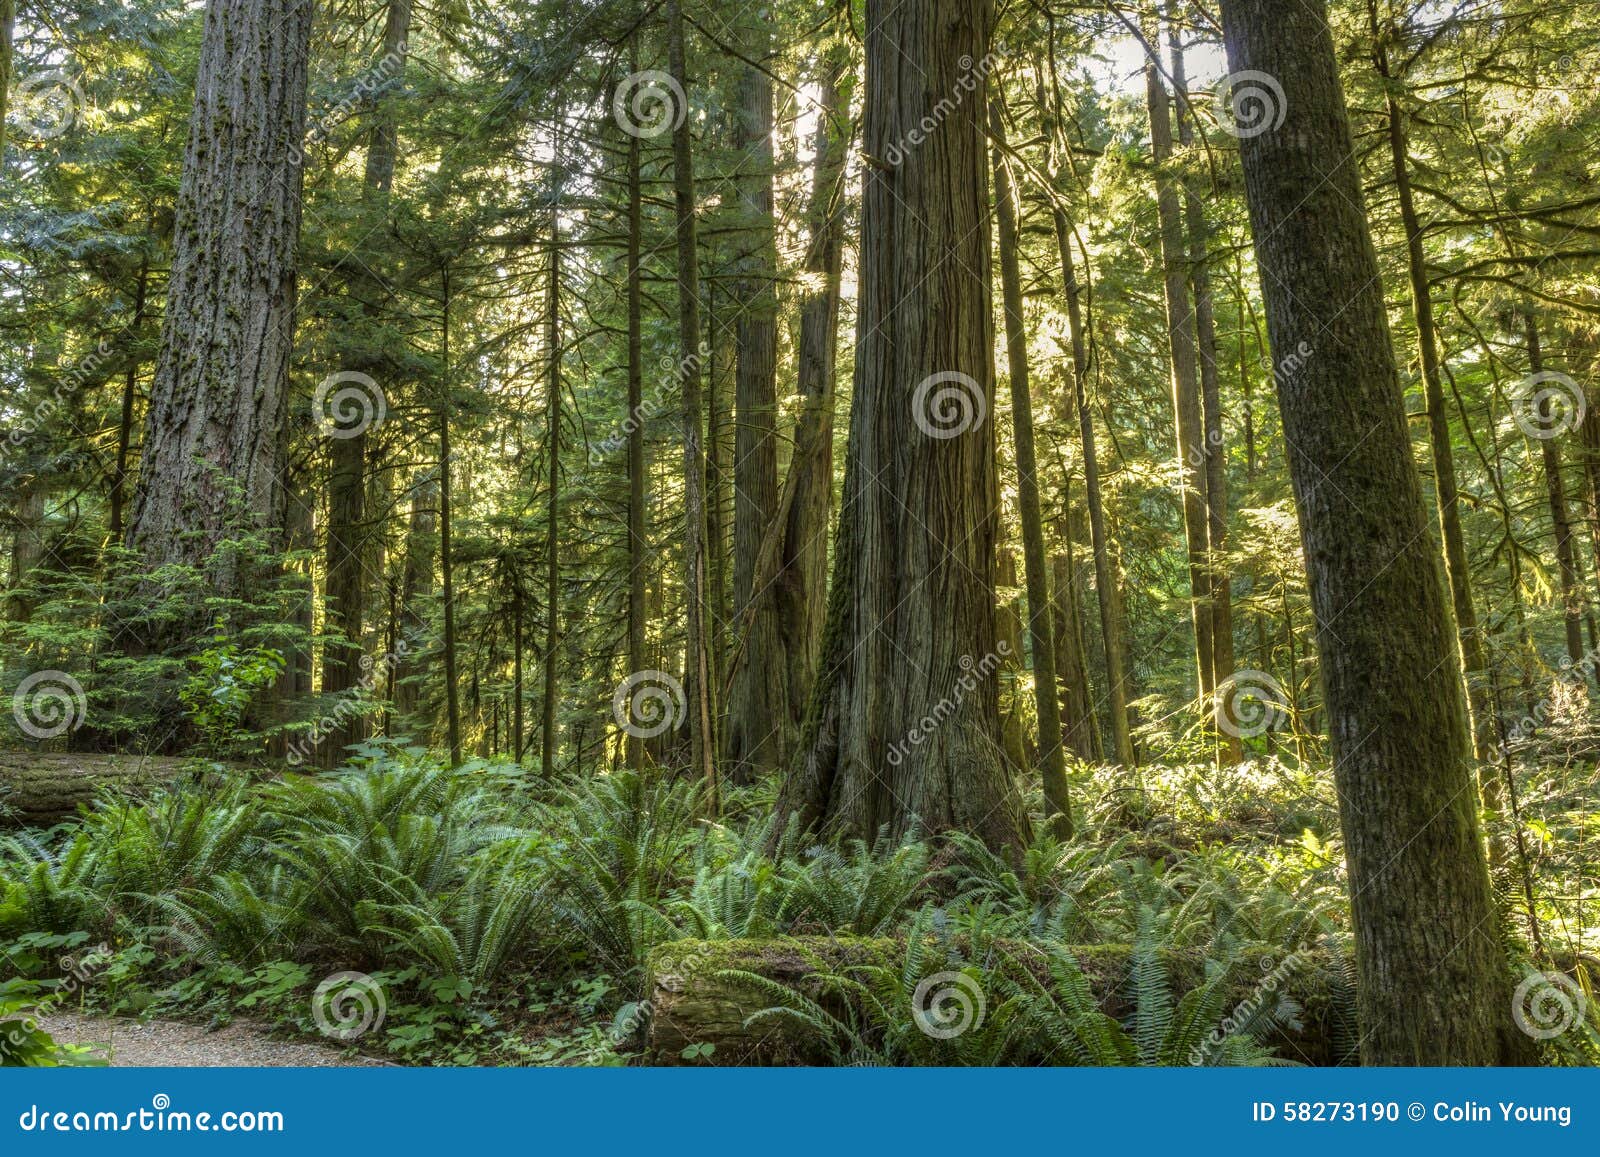 sunlight in cathedral grove